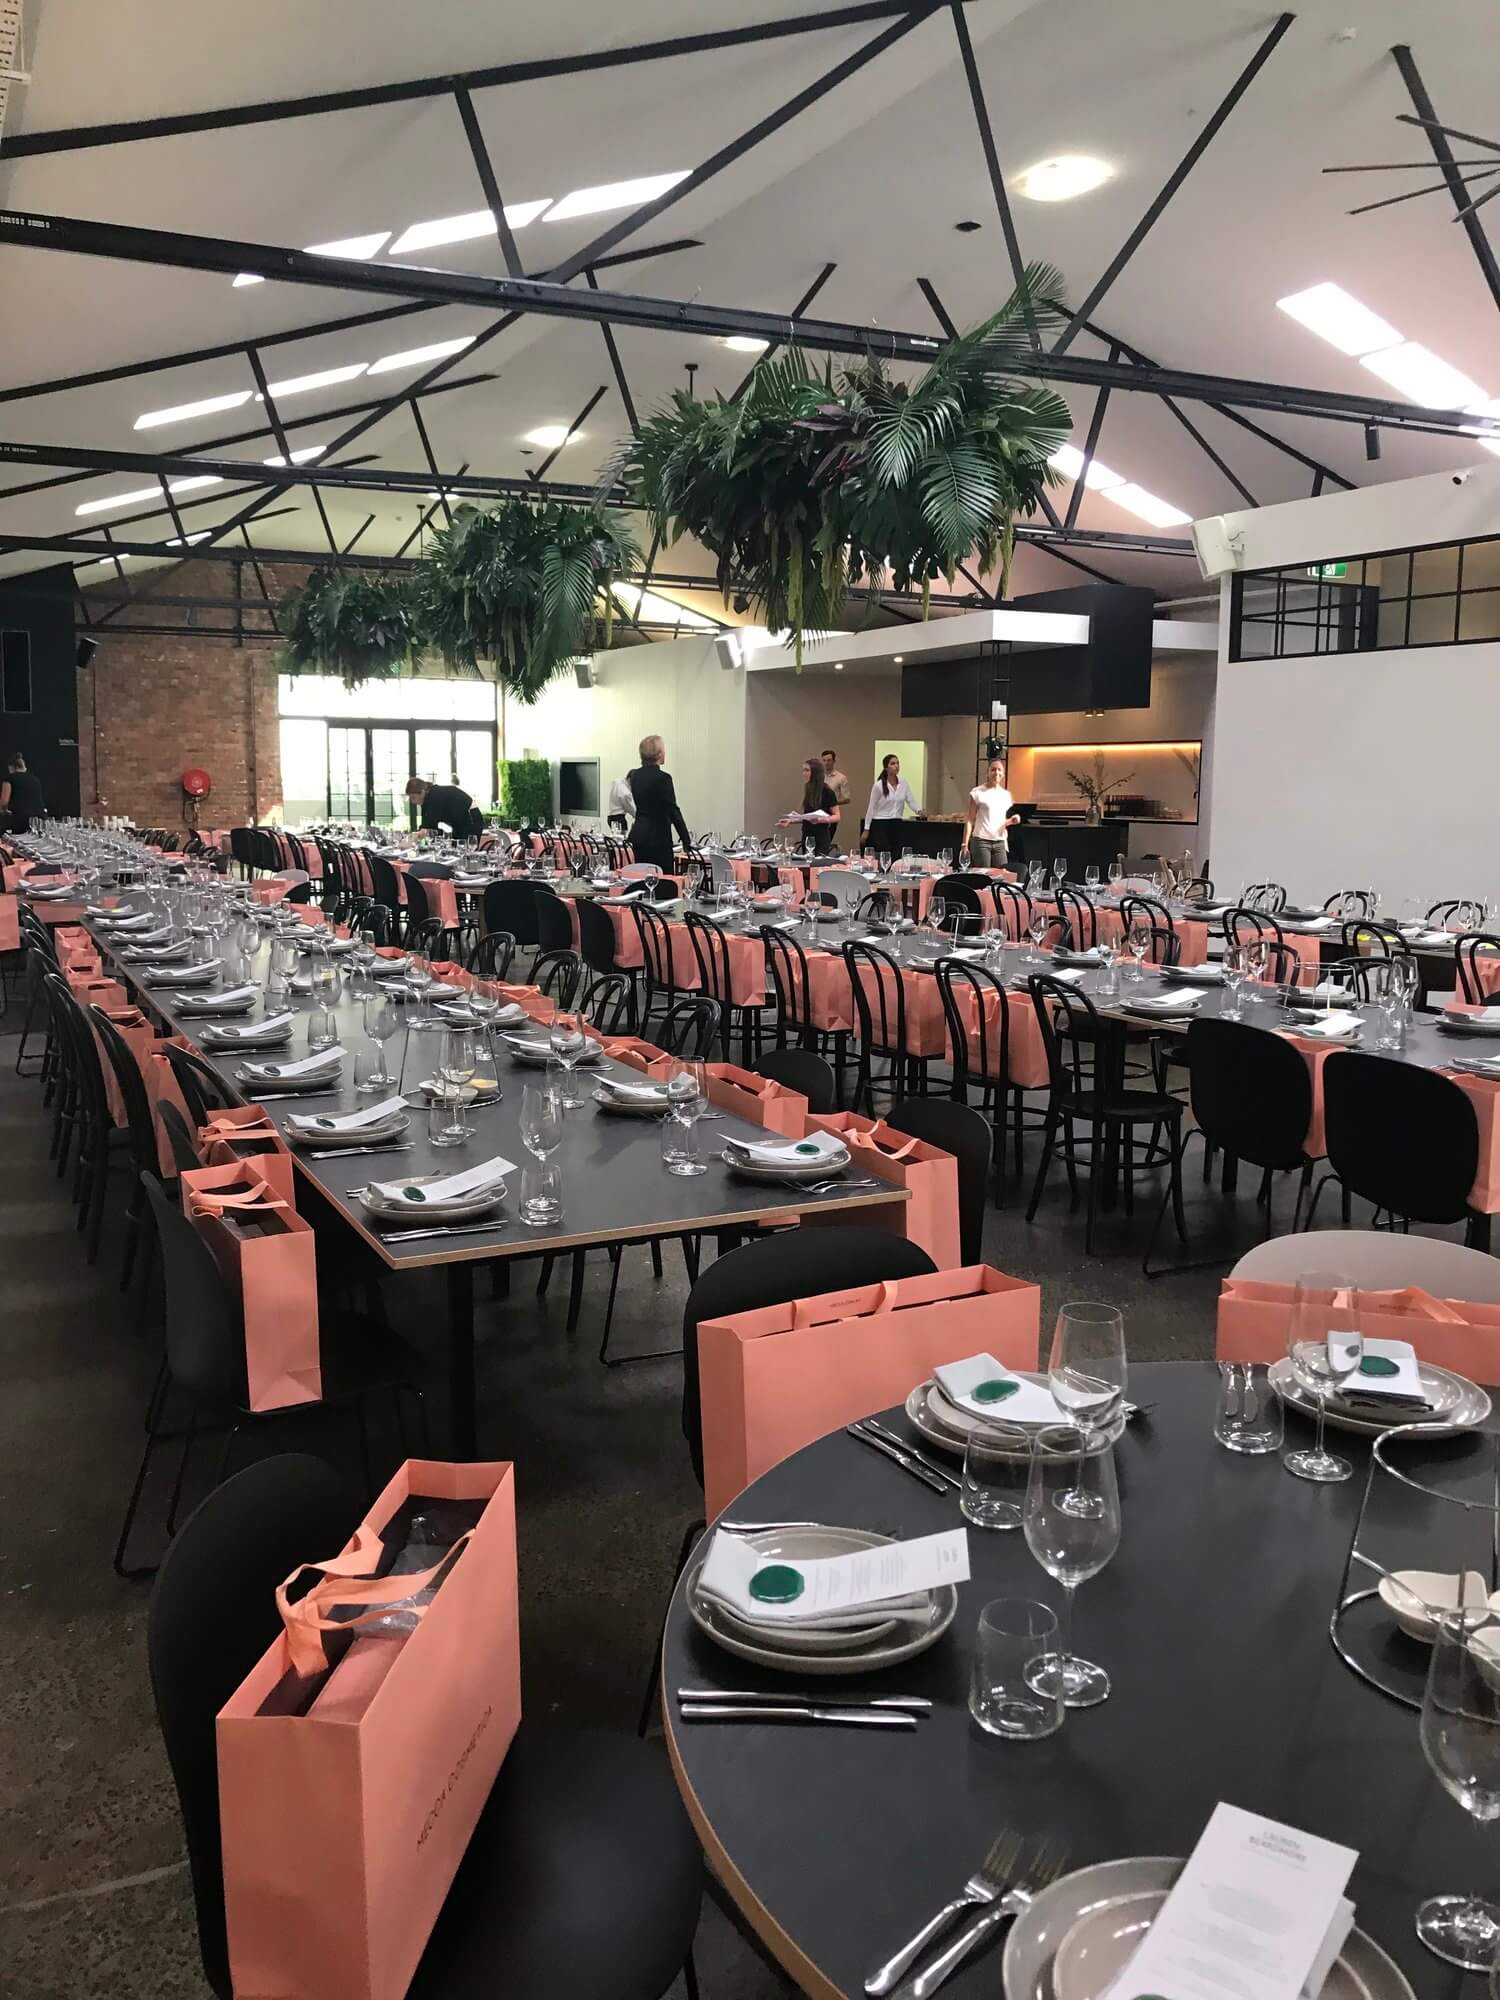 A spacious room in Melbourne's warehouse venue, all set for a dinner party with tables and chairs.